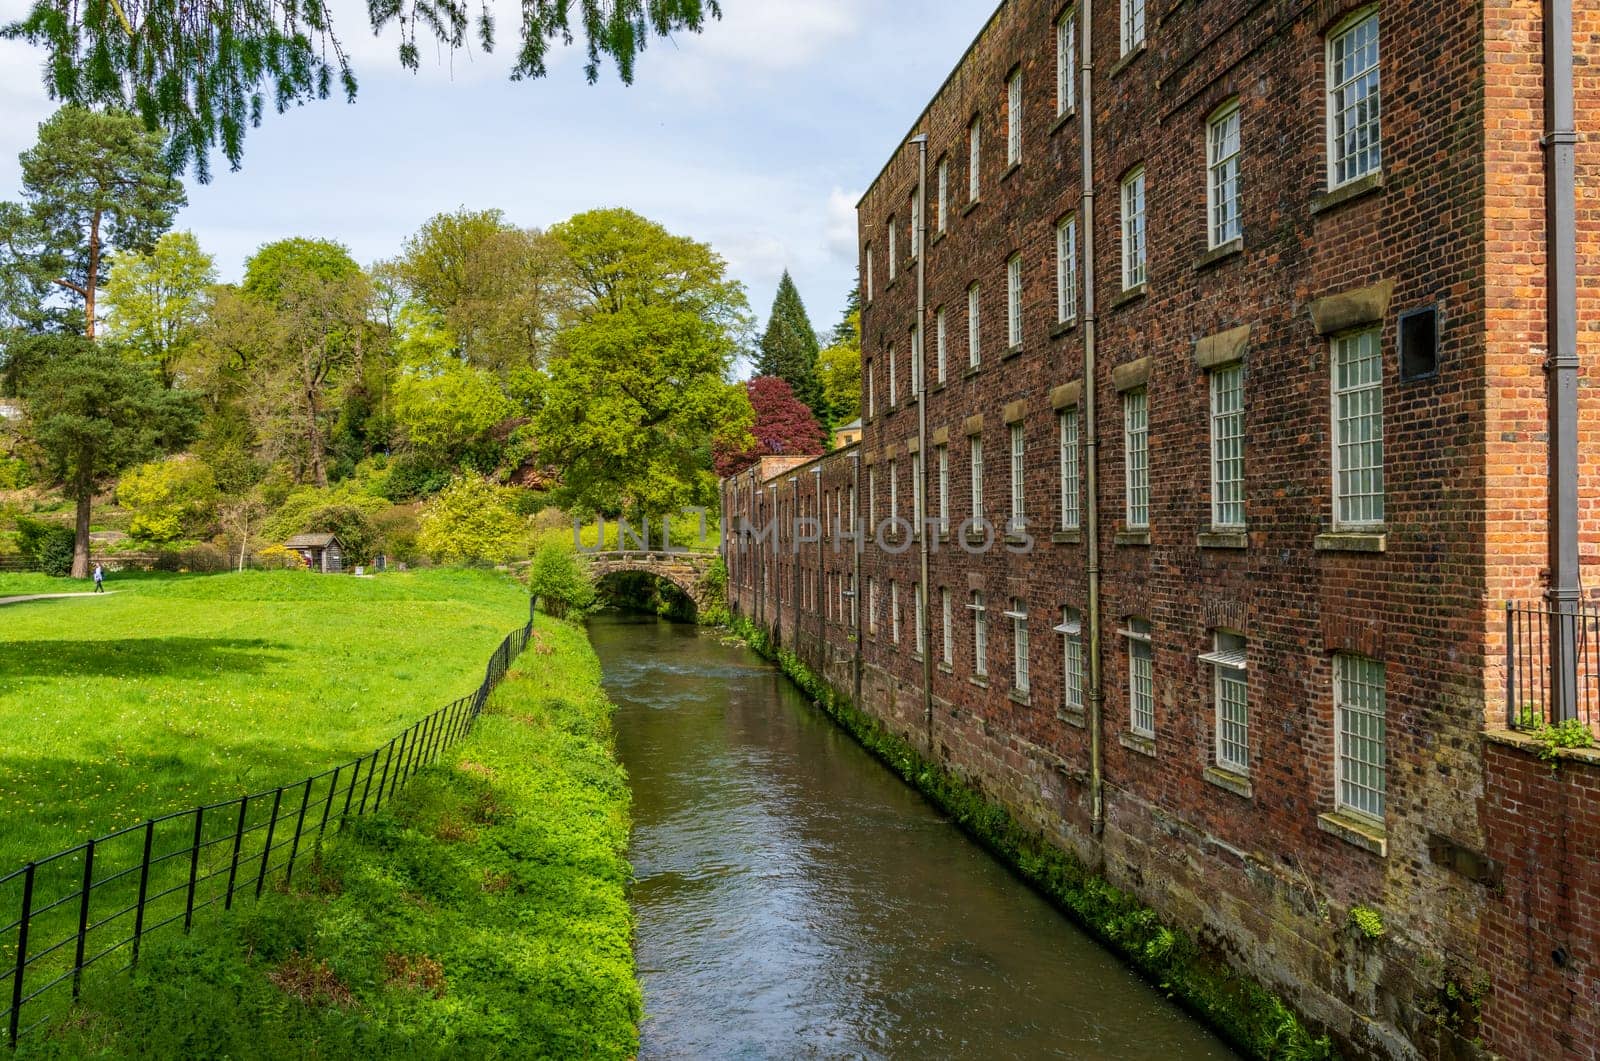 Restored industrial cotton mill in Northern England by steheap